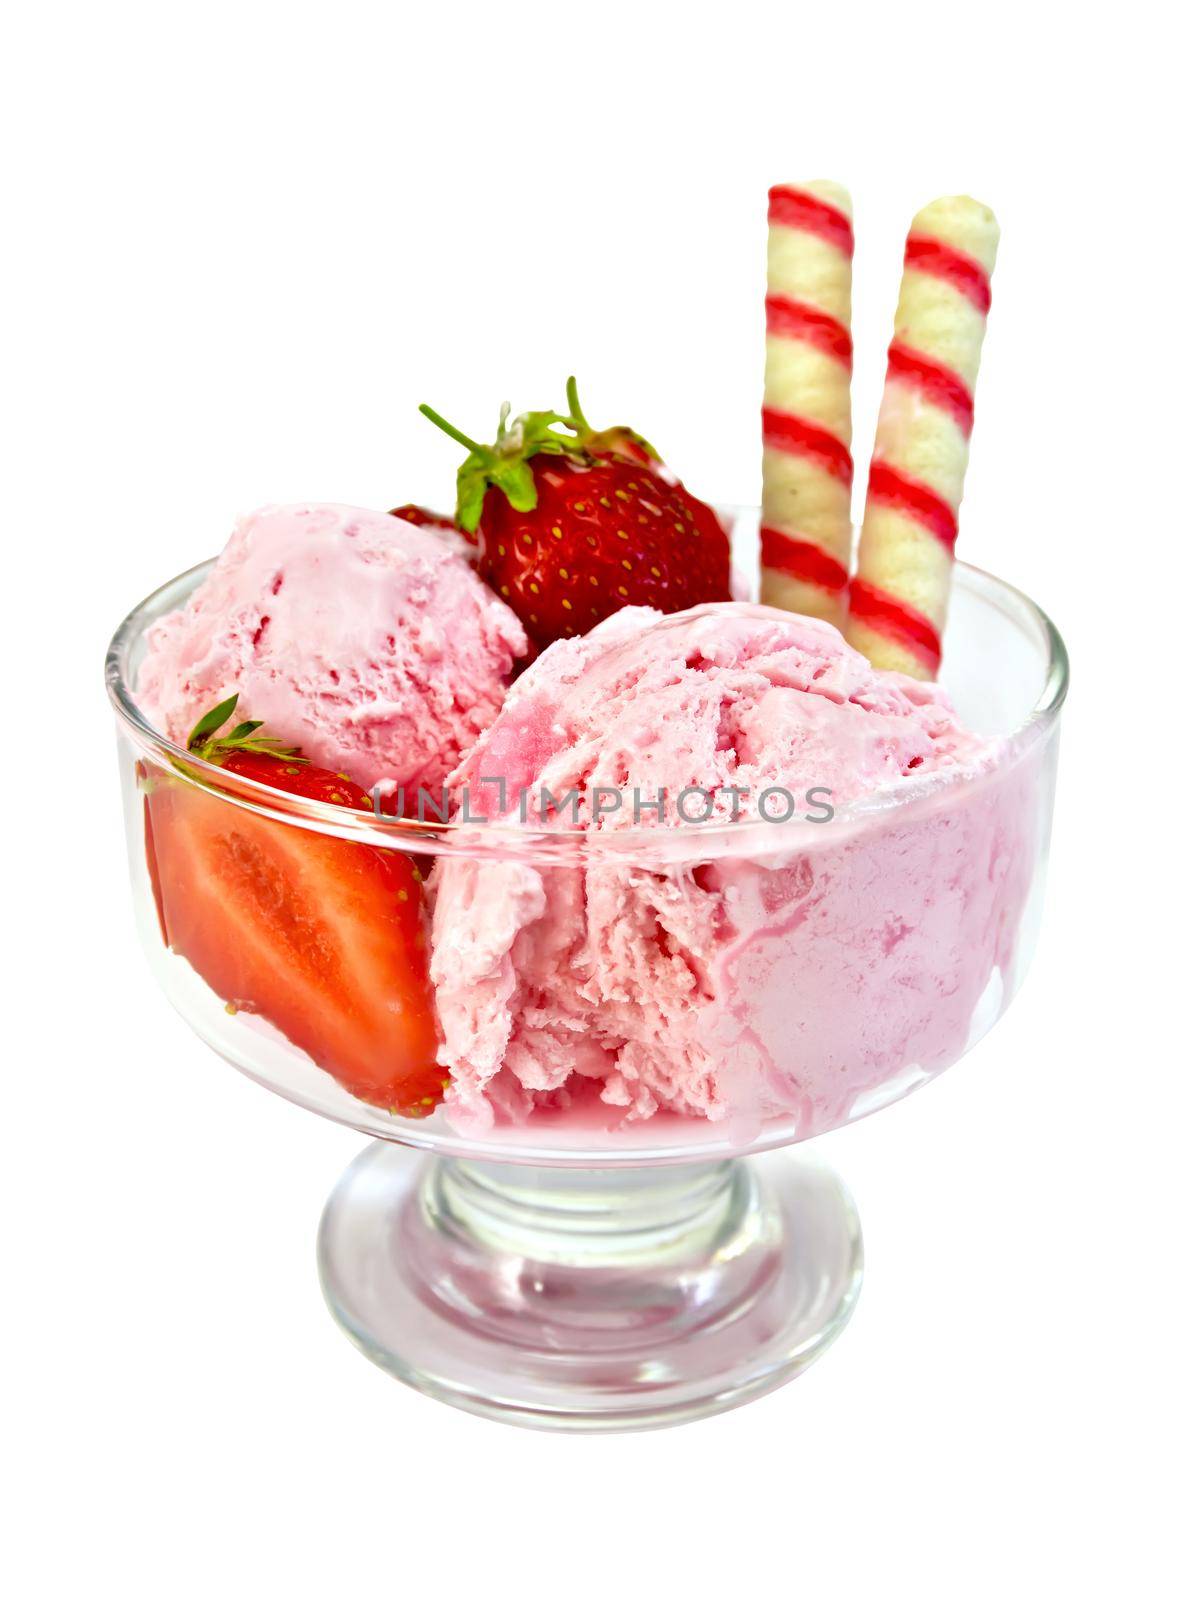 Ice cream strawberry with wafer rolls by rezkrr